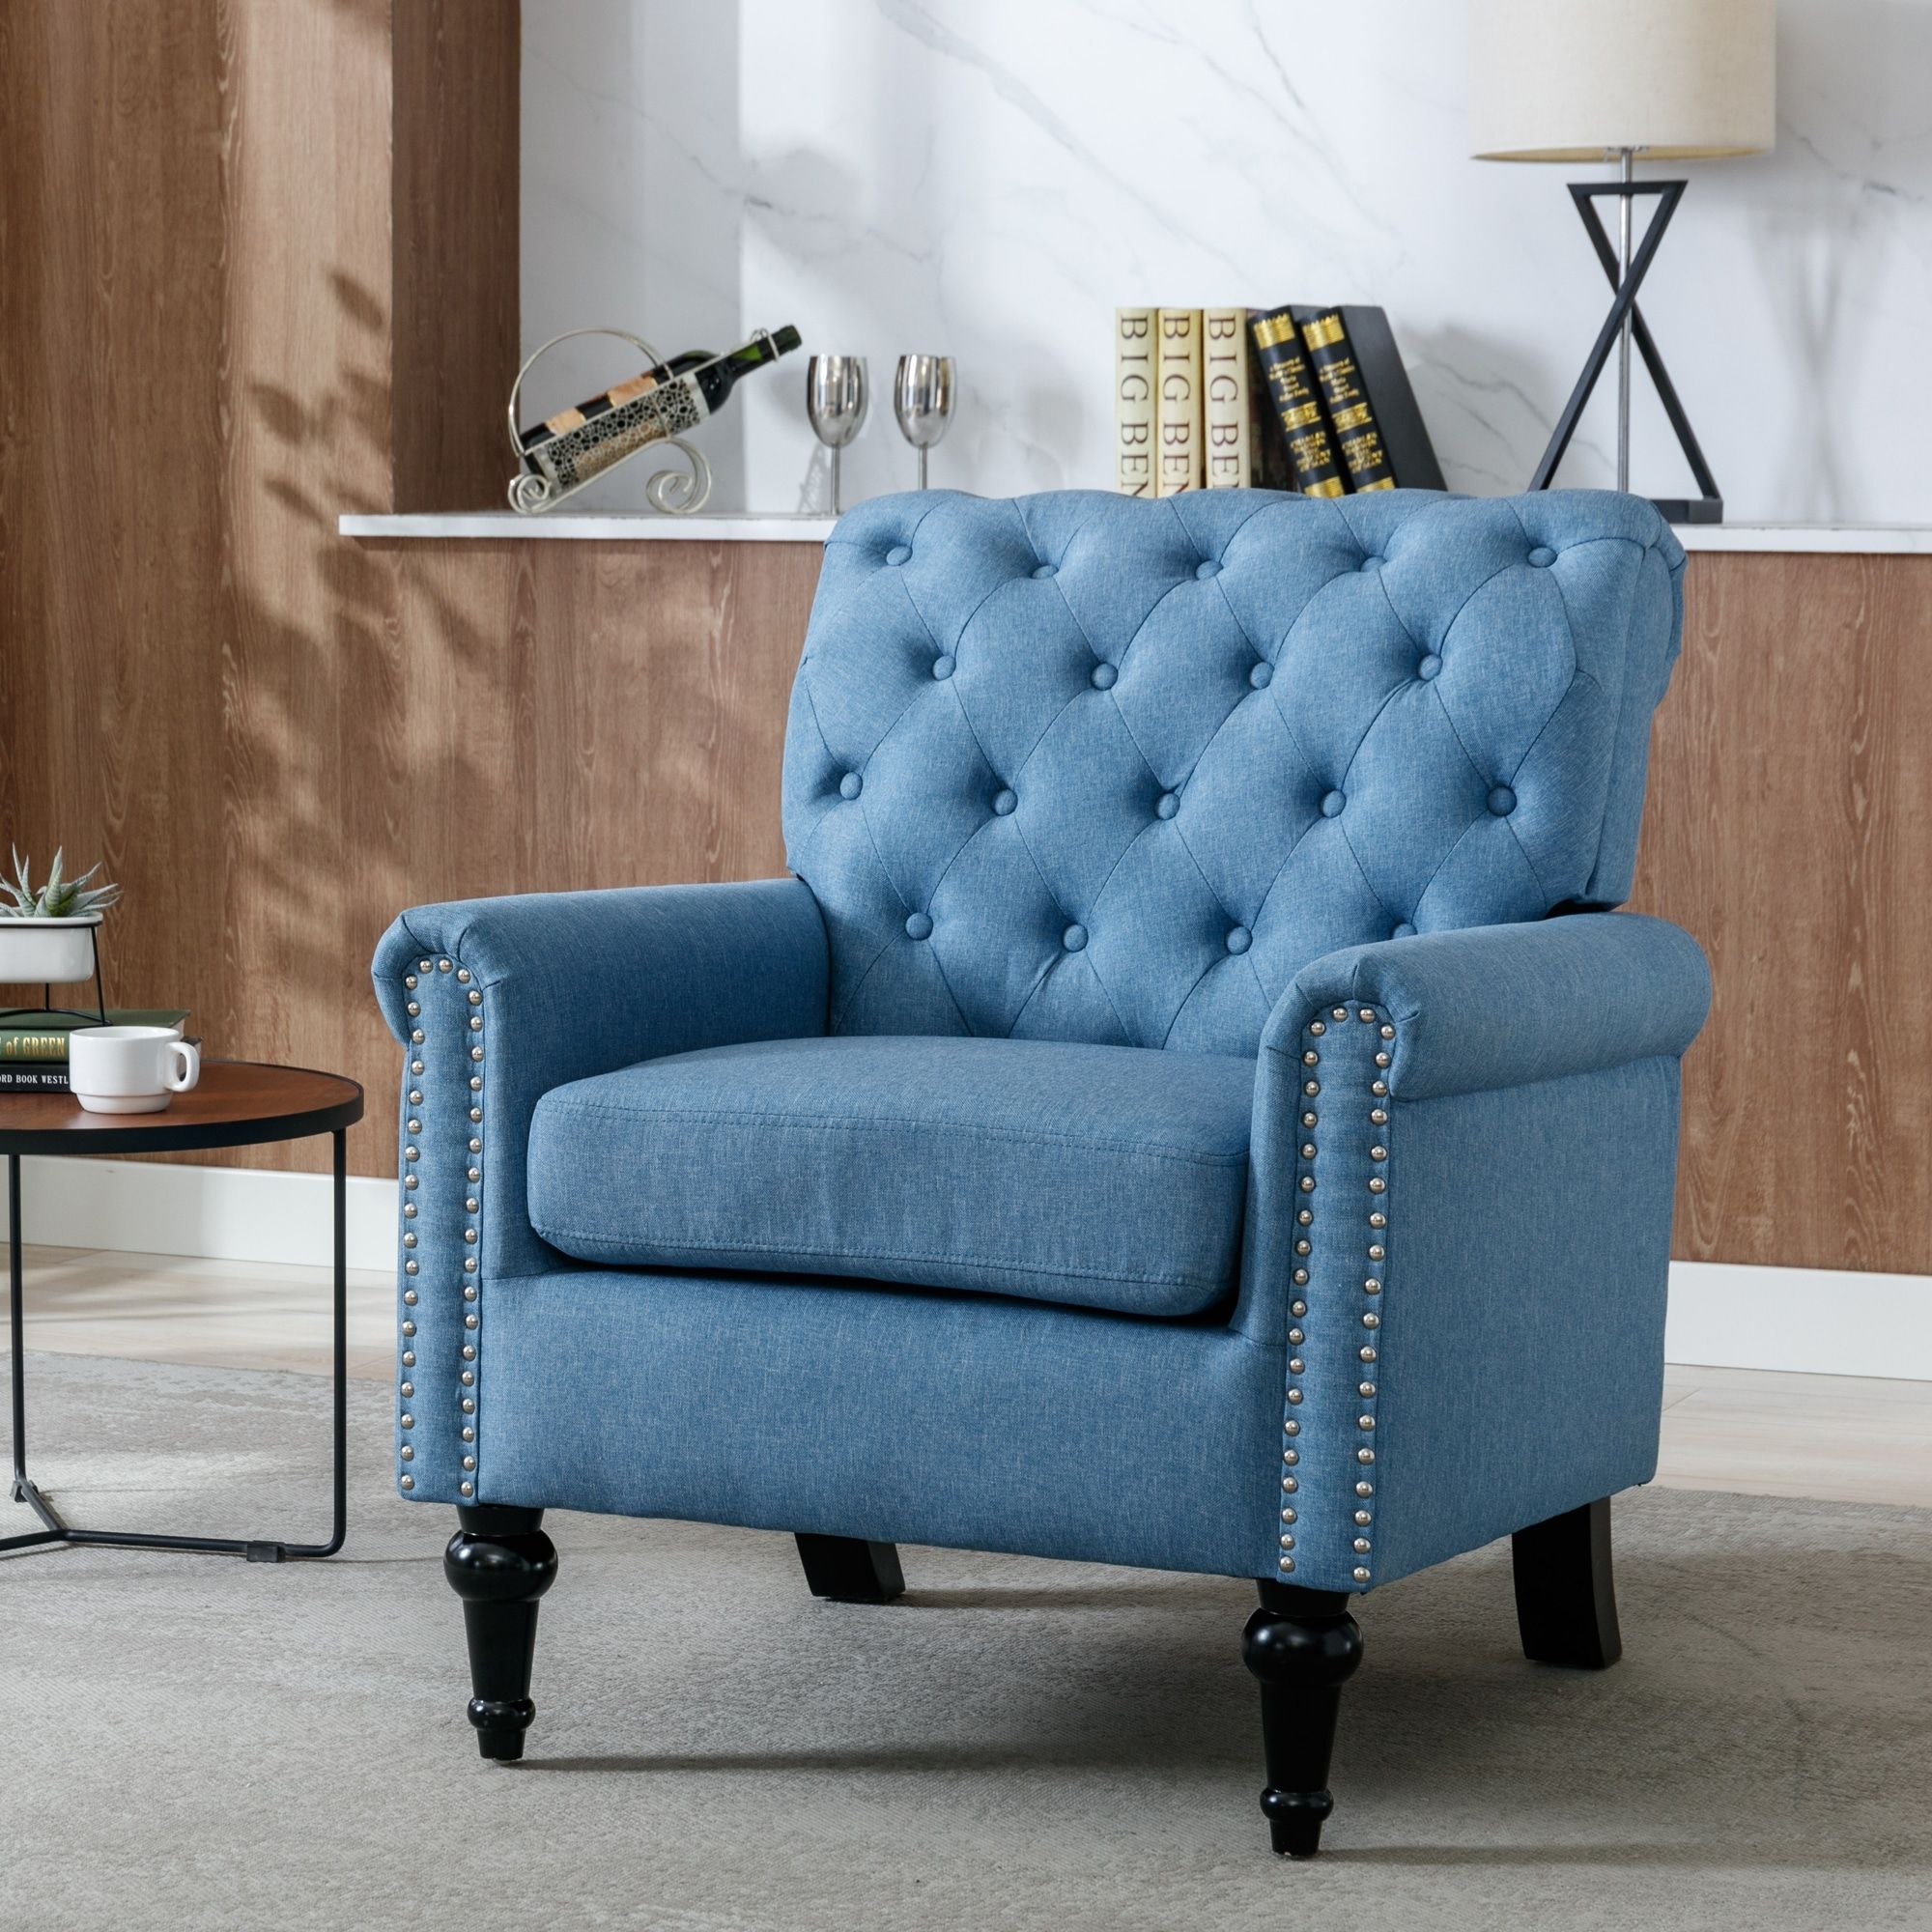 Tufted Upholstered Accent Chairs Single Sofa Chair For Livingroom With  Linen Fabric Armchairs Comfy Reading Chair – Bed Bath & Beyond – 38047189 Intended For Comfy Reading Armchairs (Photo 5 of 15)